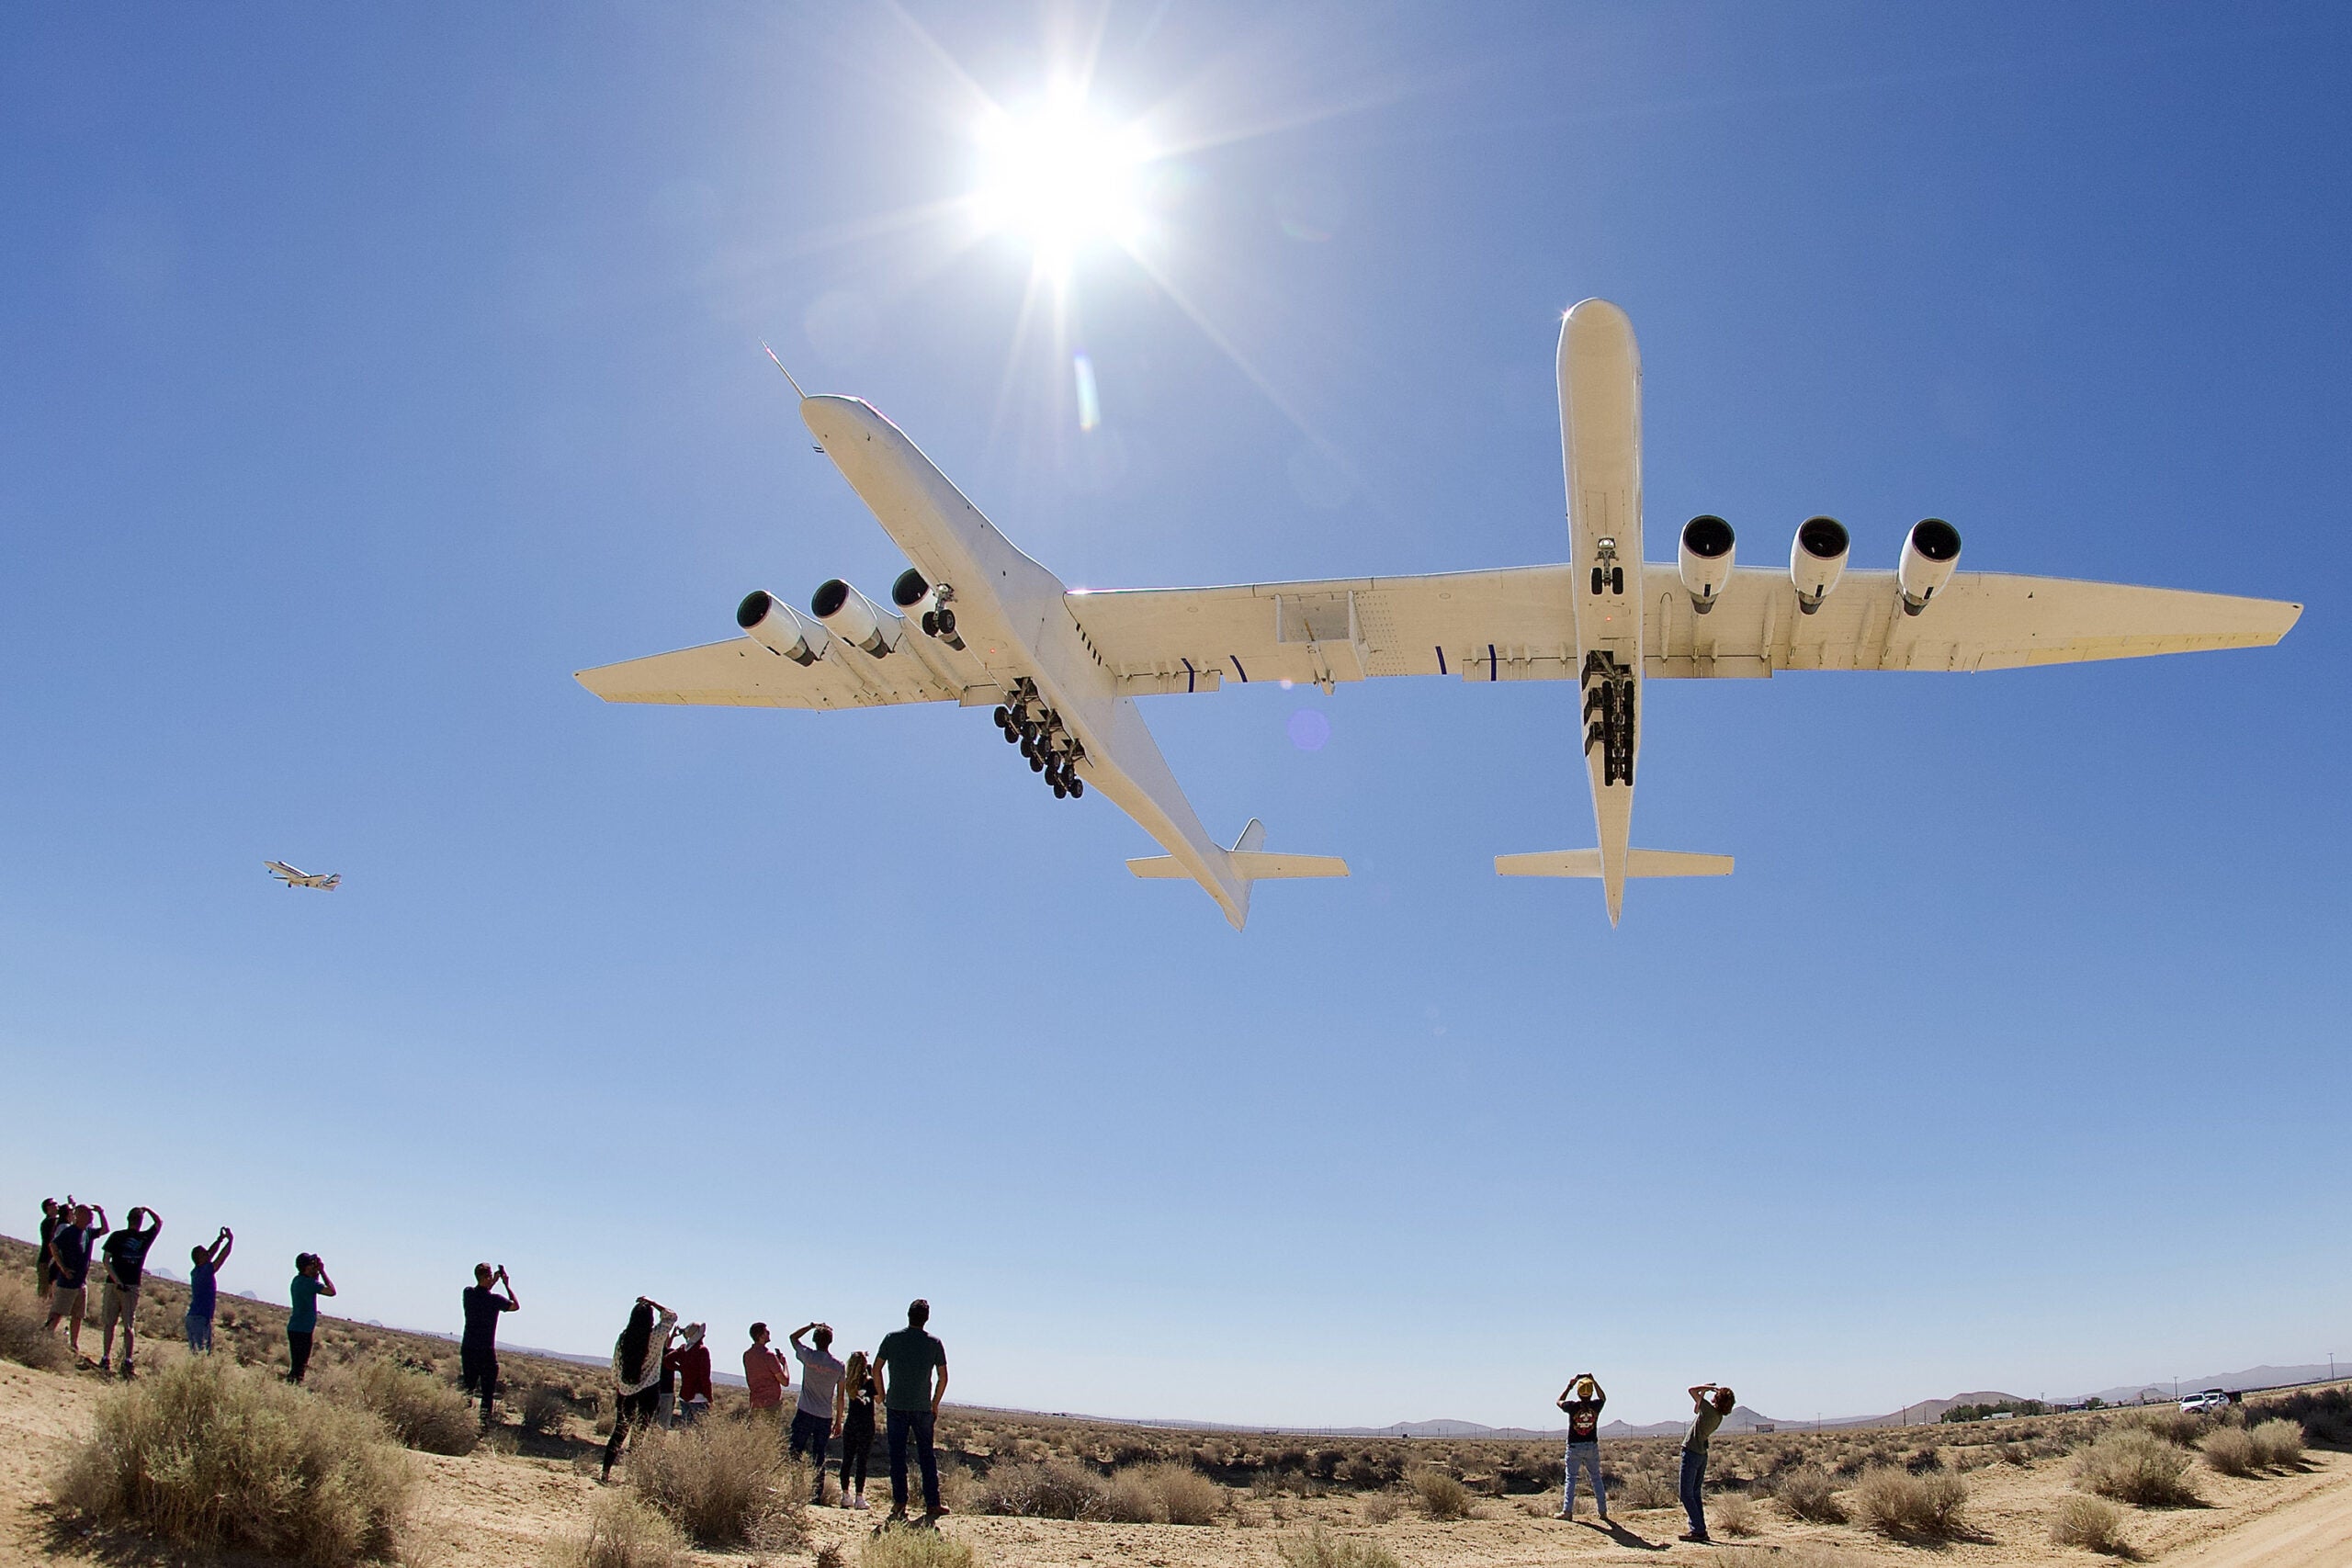 World’s Largest Airplane Flies to New Heights